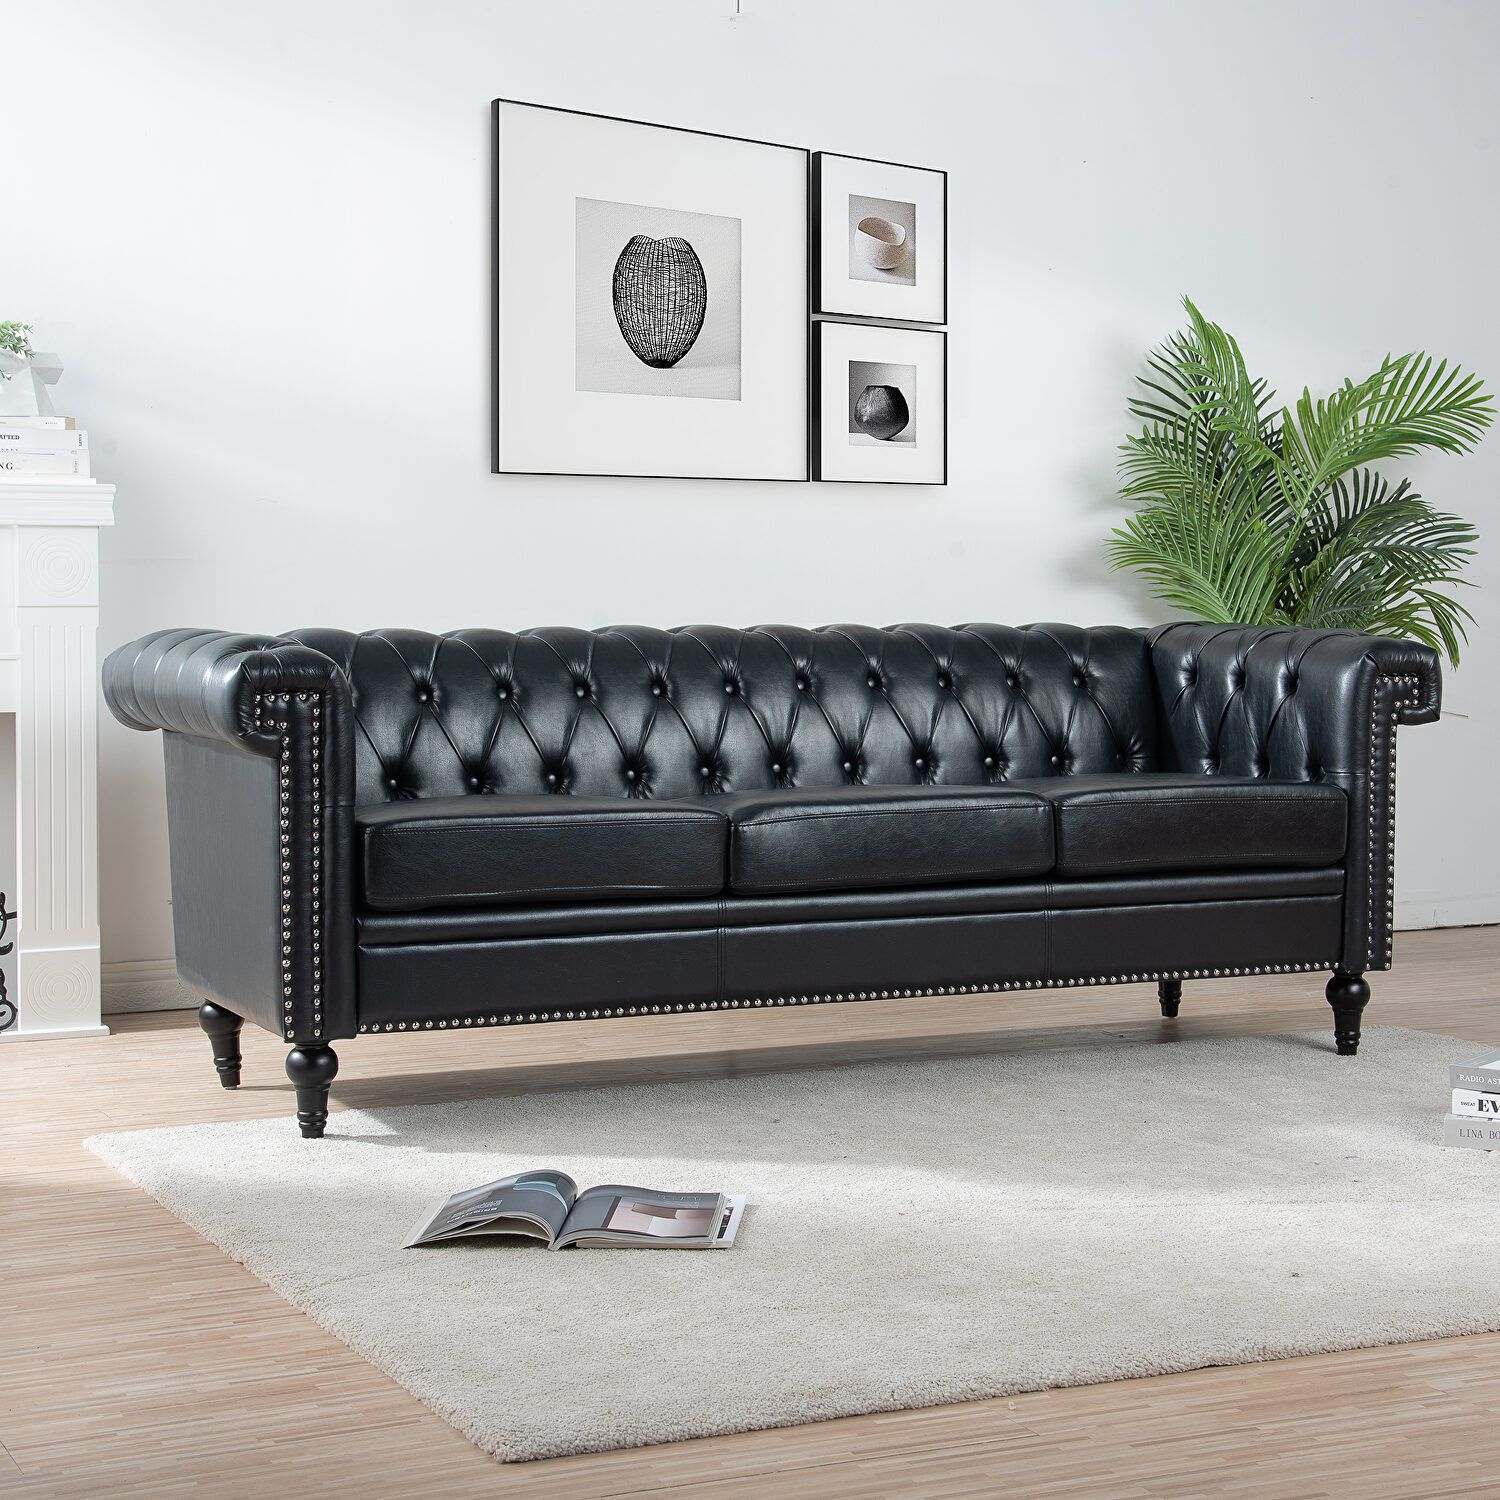 La Spezia D928 Black Sofa W68042996 | Comfyco With Traditional 3 Seater Sofas (View 12 of 15)